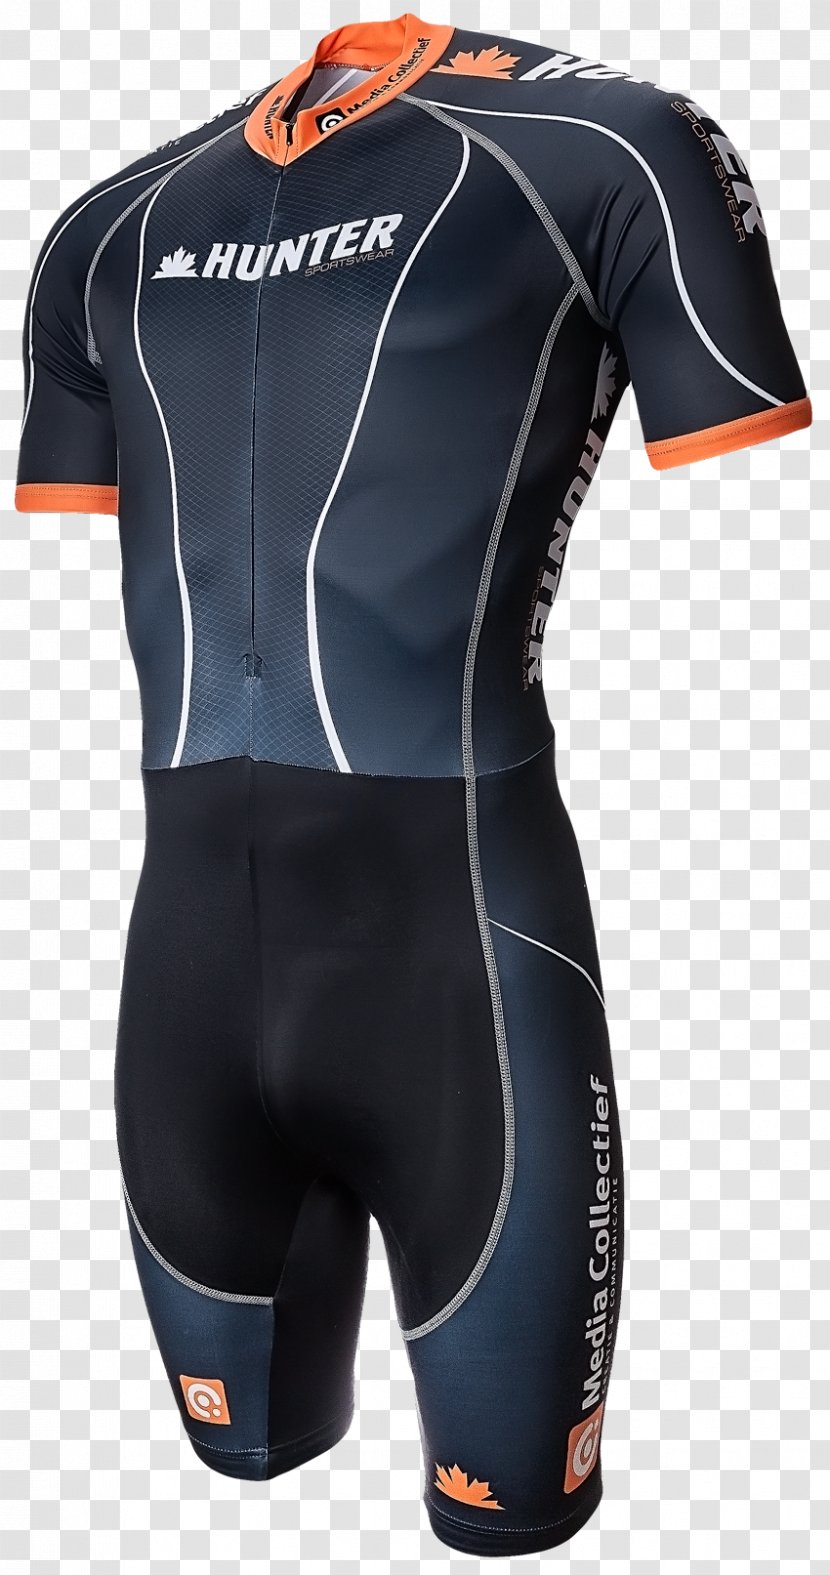 Wetsuit Sleeve Clothing Uniform Sport - Bicycle Transparent PNG